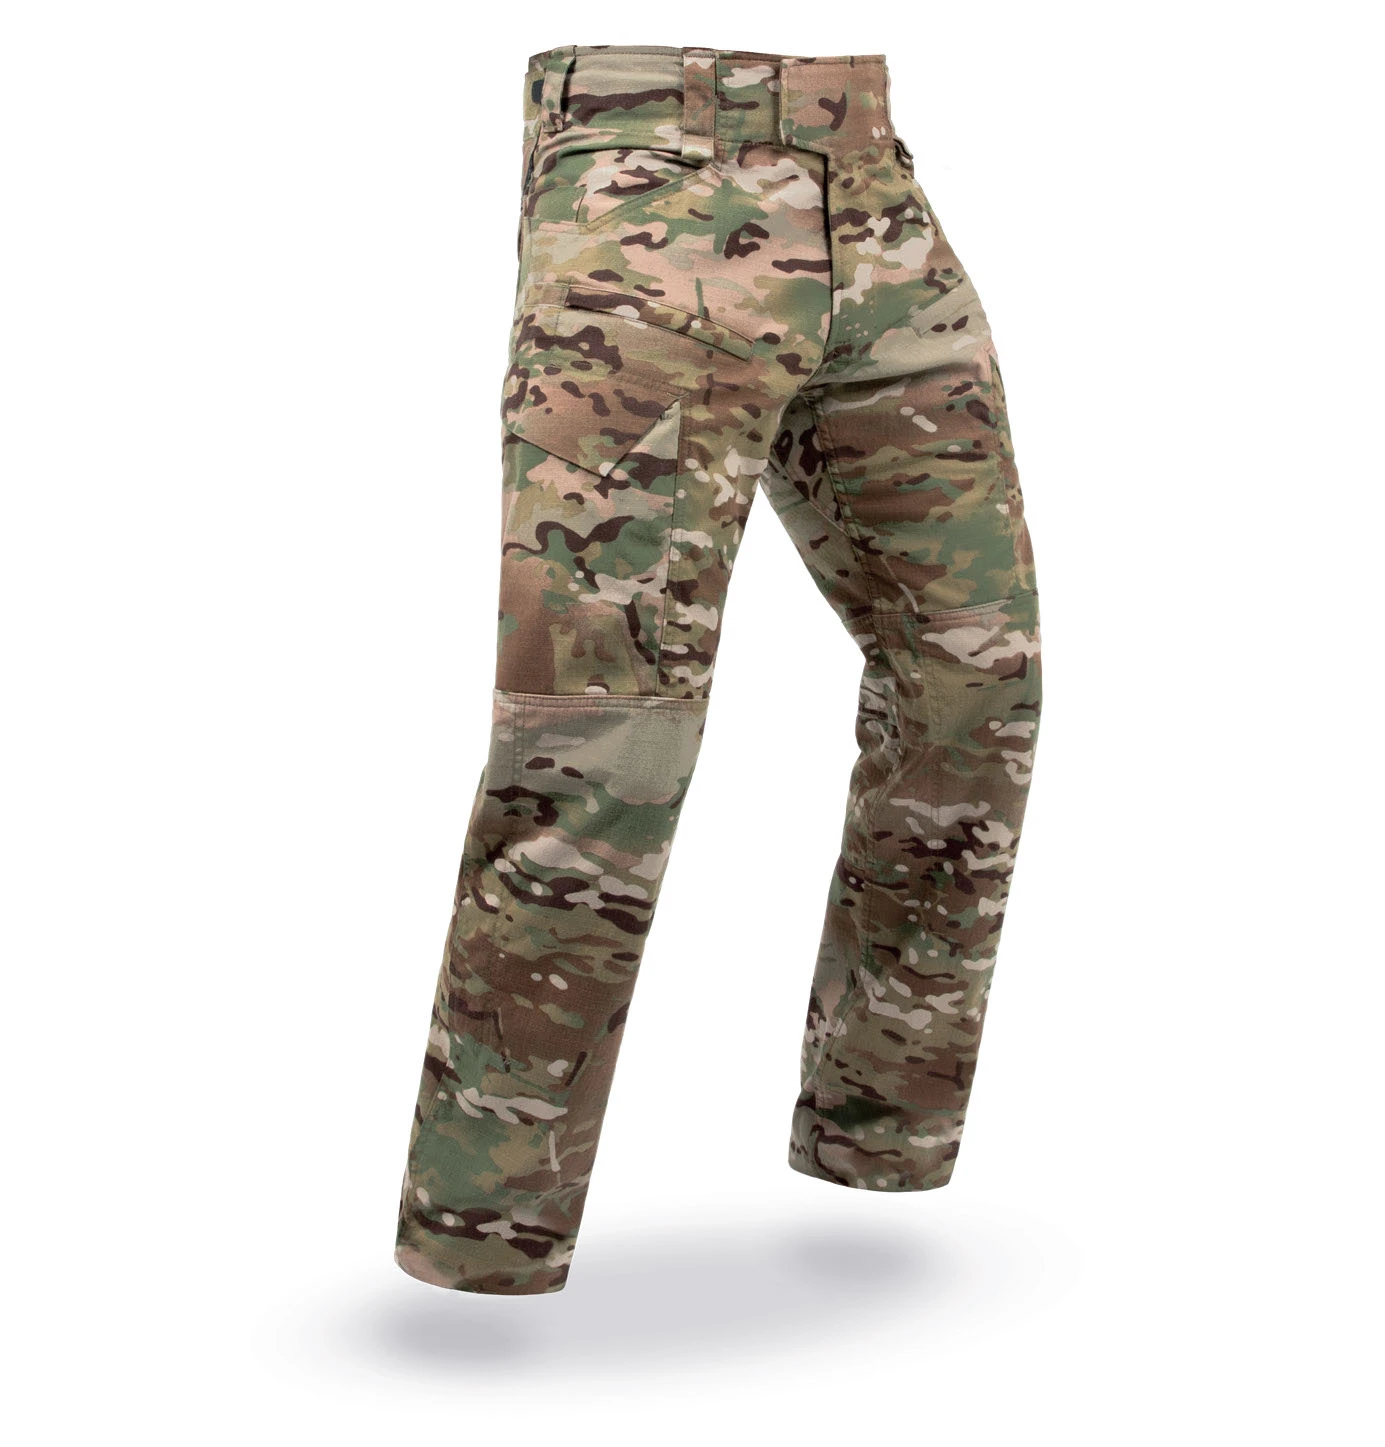 Crye Precision - GB4 Field Pant